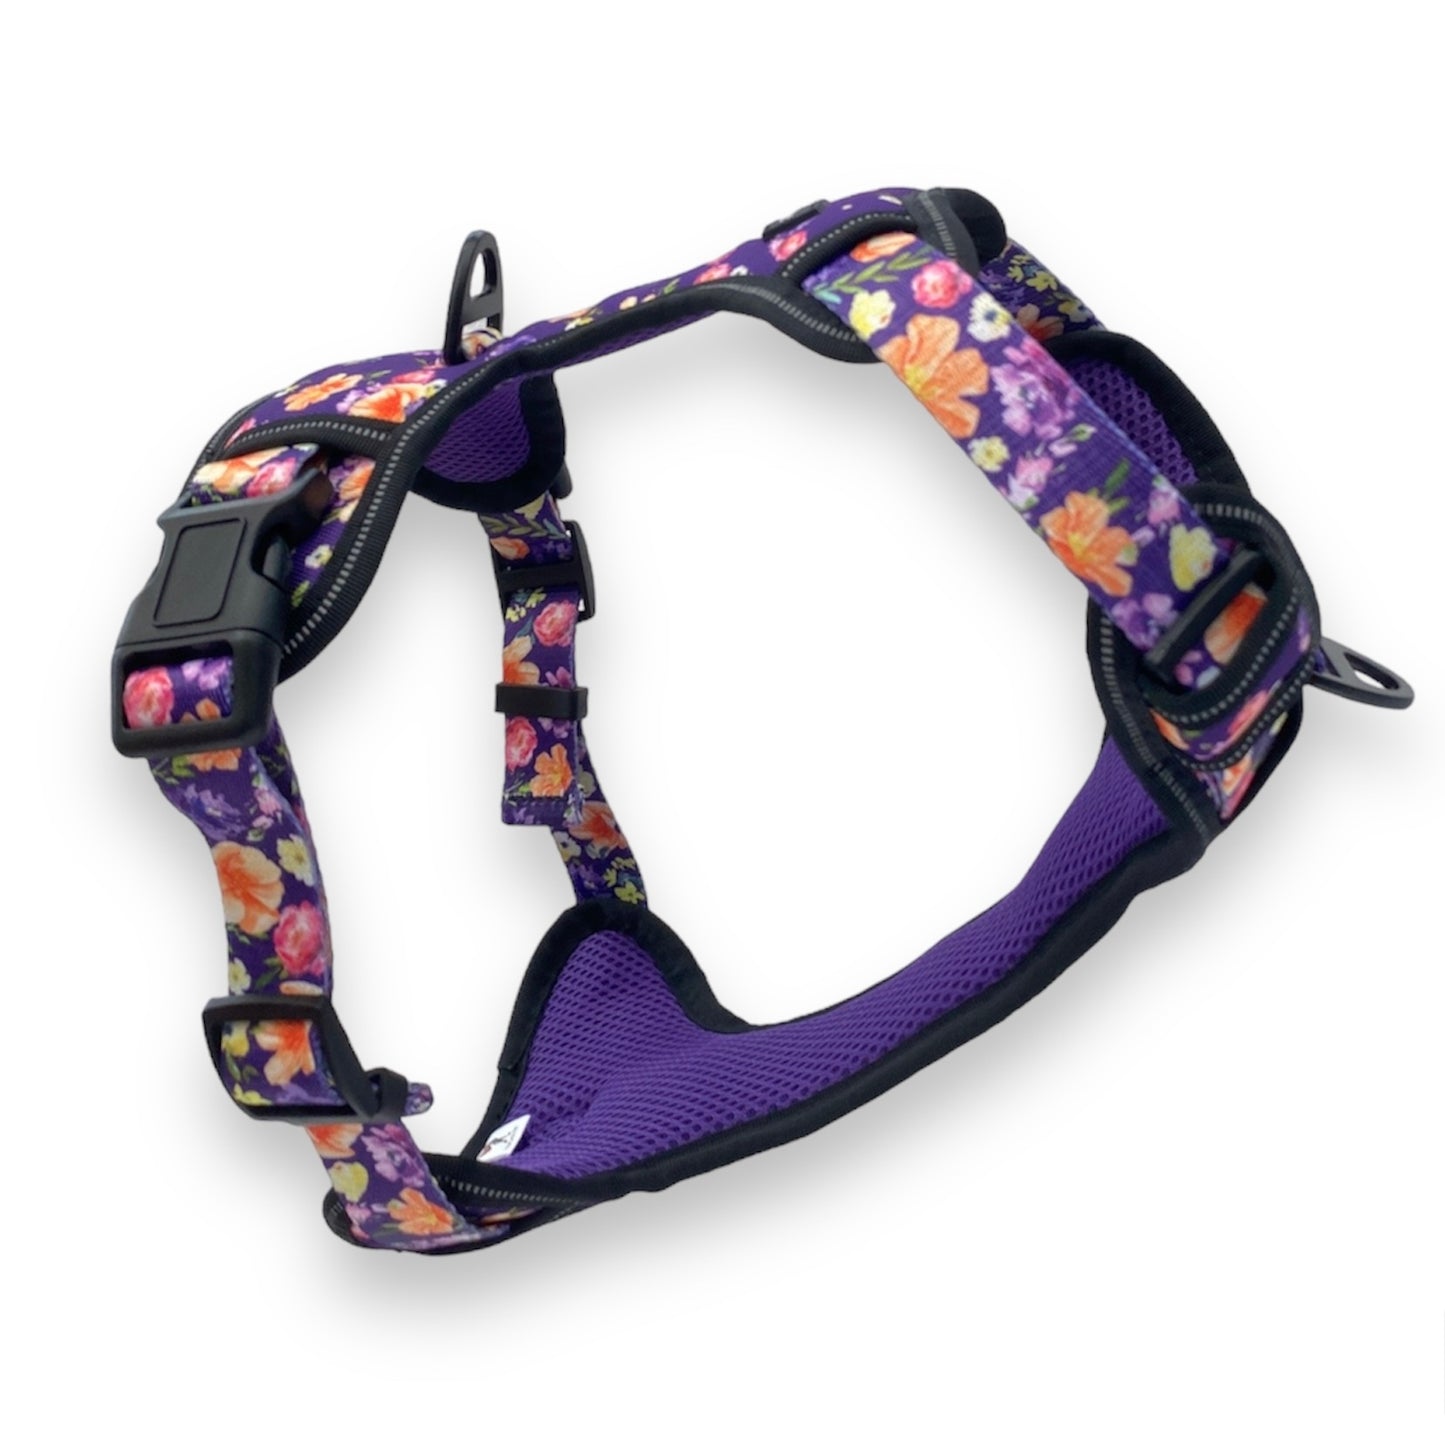 No Pull No Escape Heavy Duty Dog Harness by FearLess Pet - Purple Poppies